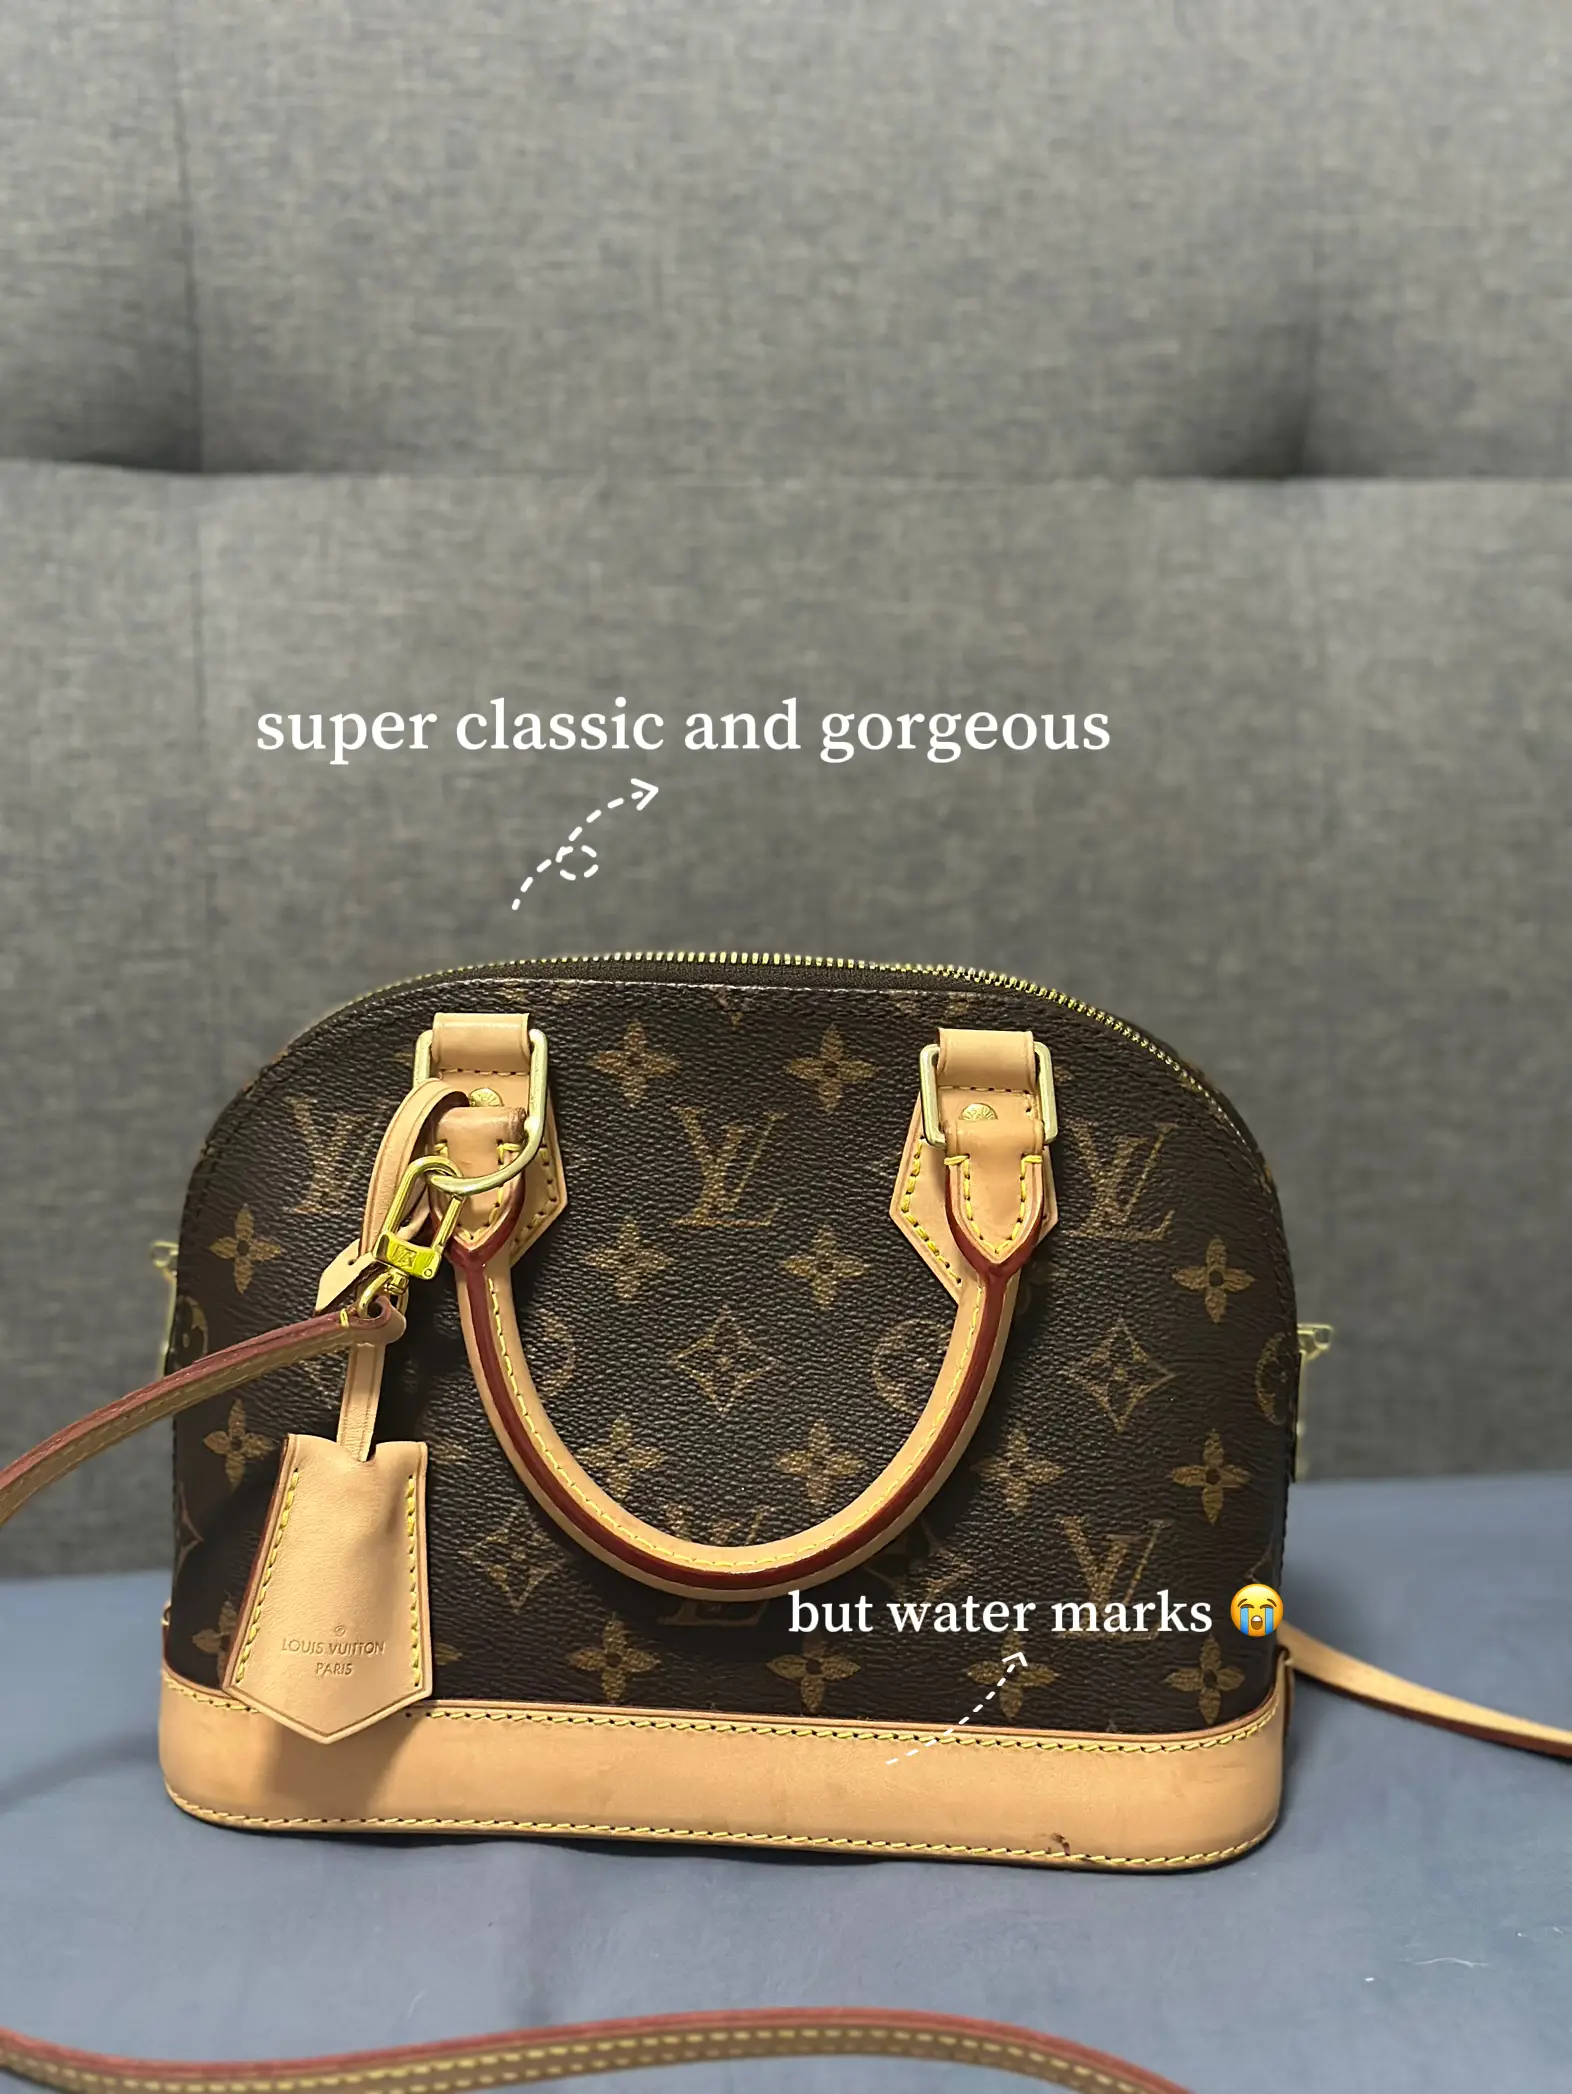 The Louis Vuitton Montaigne BB seems underrated to me! Love this